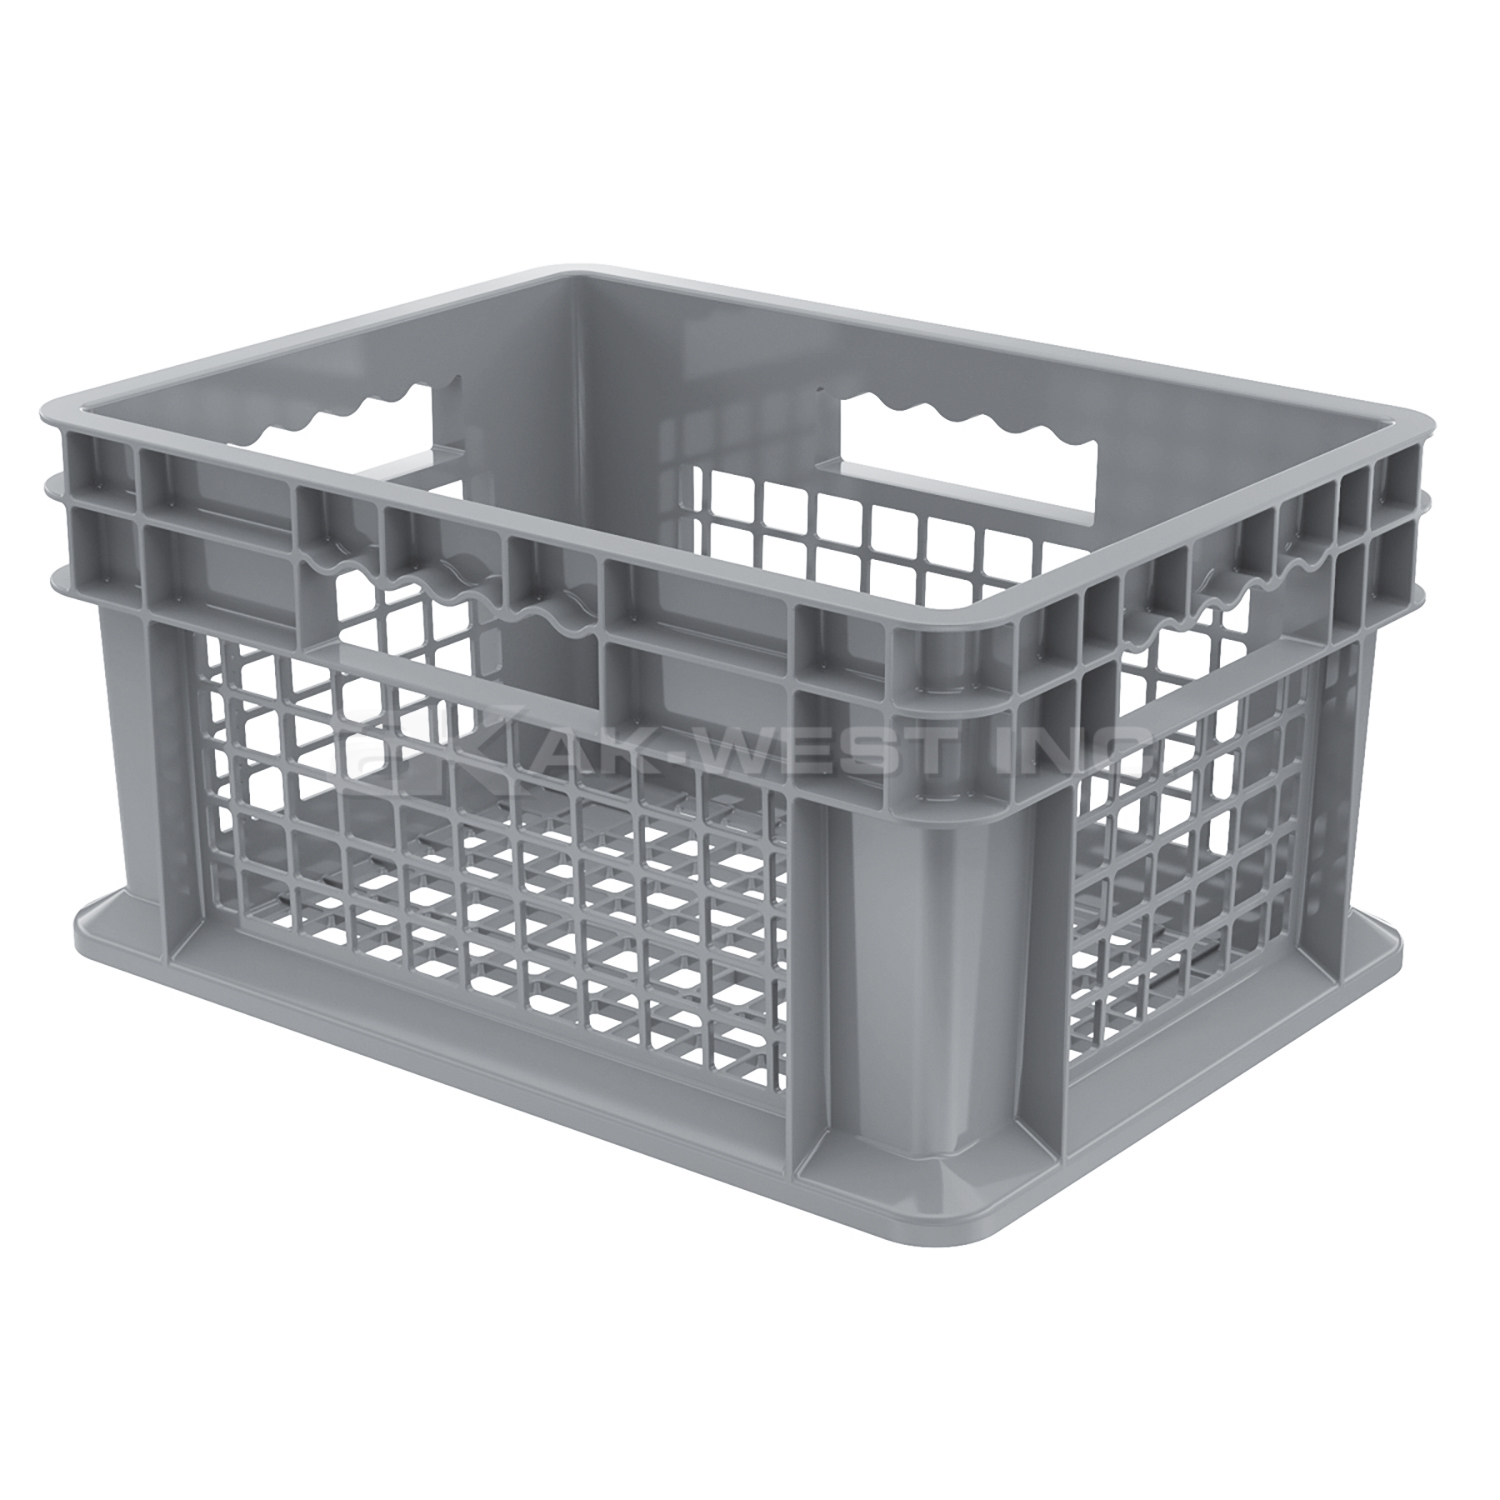 Grey, 15-3/4" x 11-3/4" x 8-1/4", Vented Side and Base, Straight Wall Container (12 Per Carton)